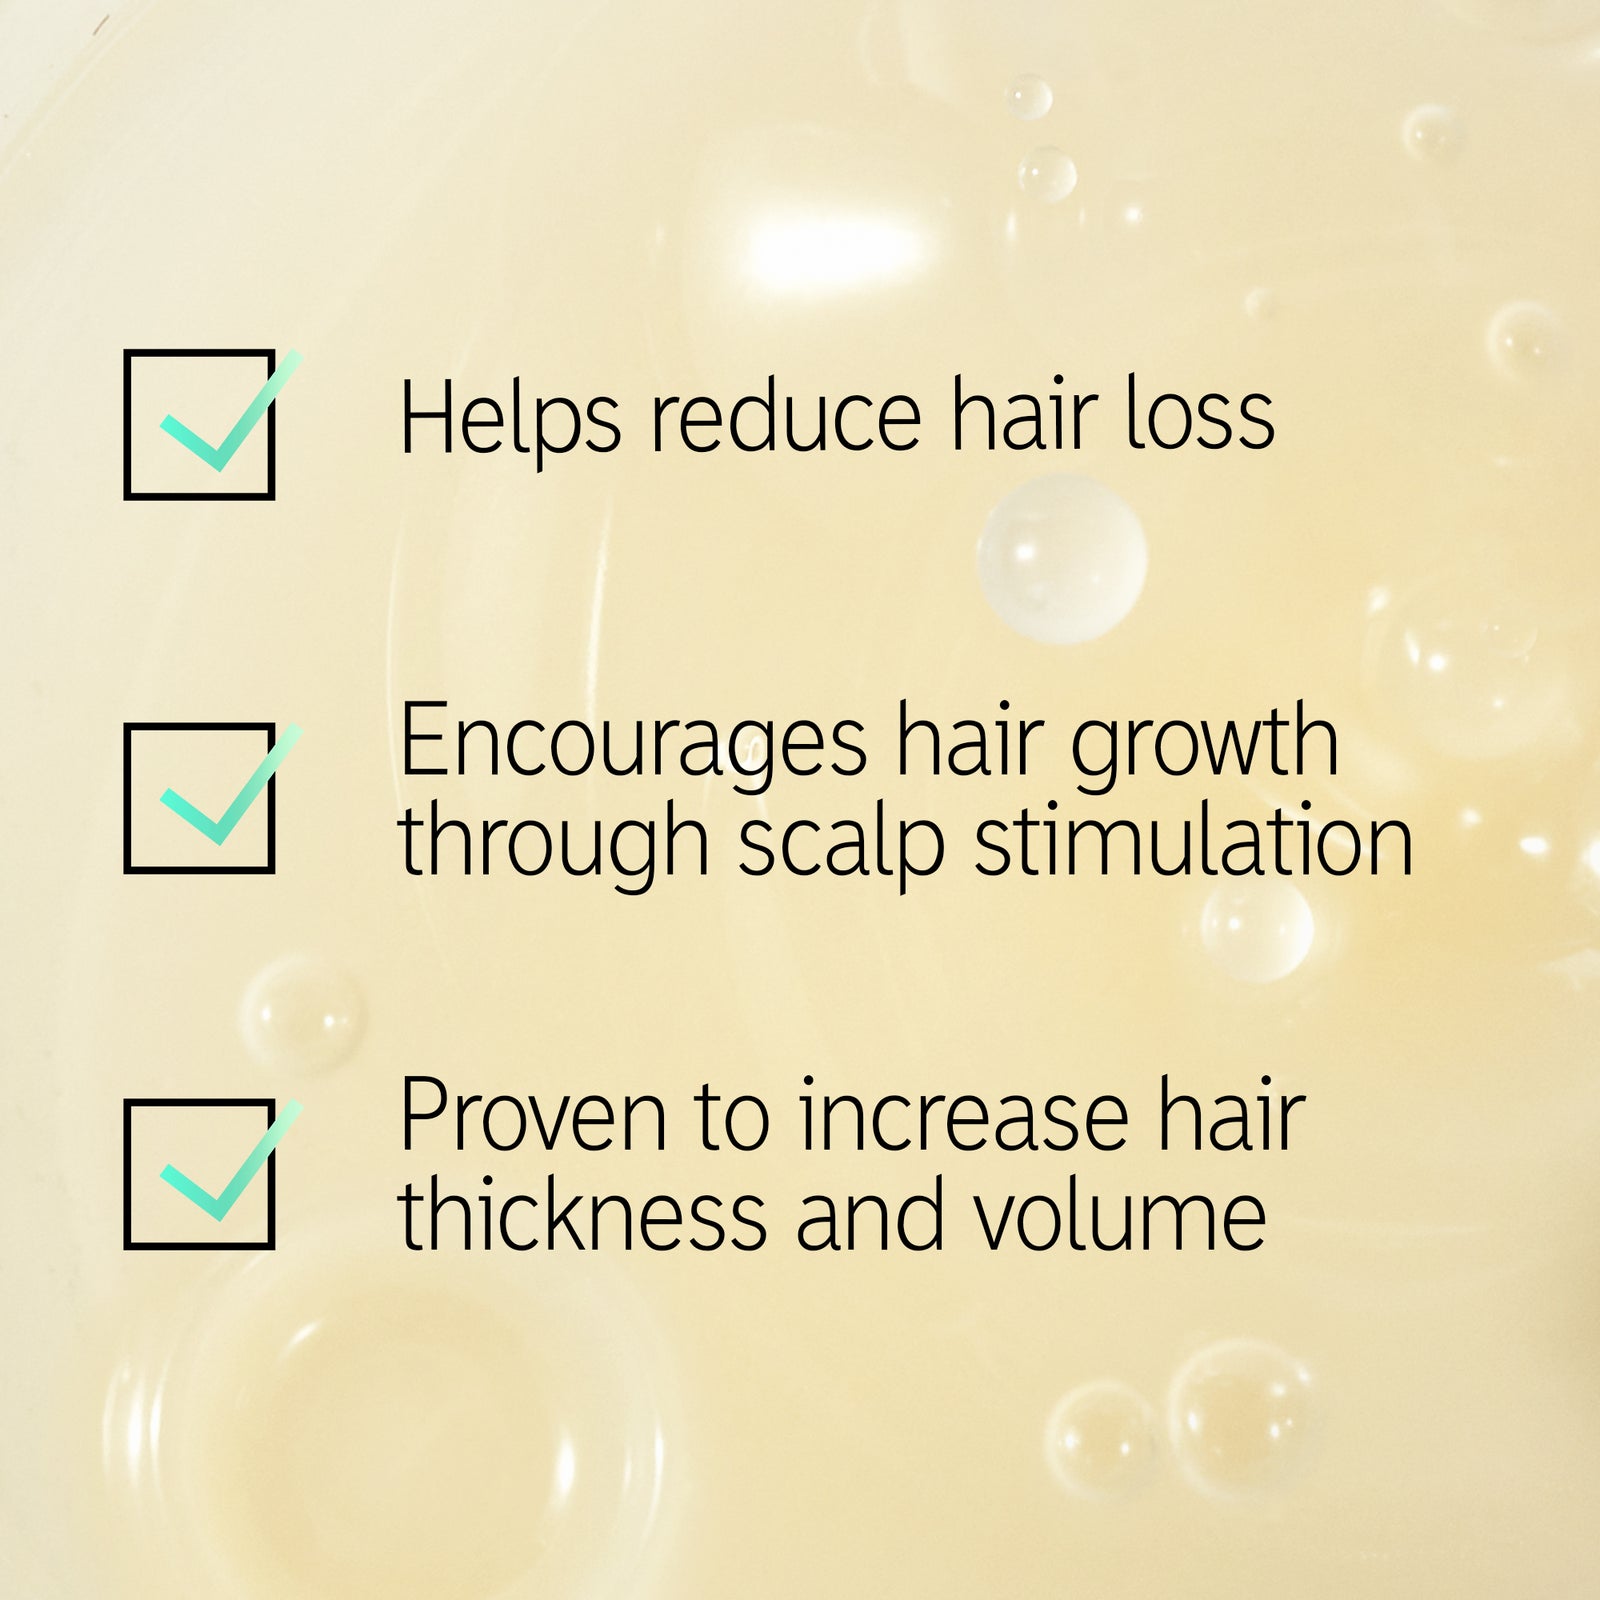 Texture text overlay 'helps reduce hair loss, encourages hair growth through scalp stimulation and proven to increase hair thickness and volume'